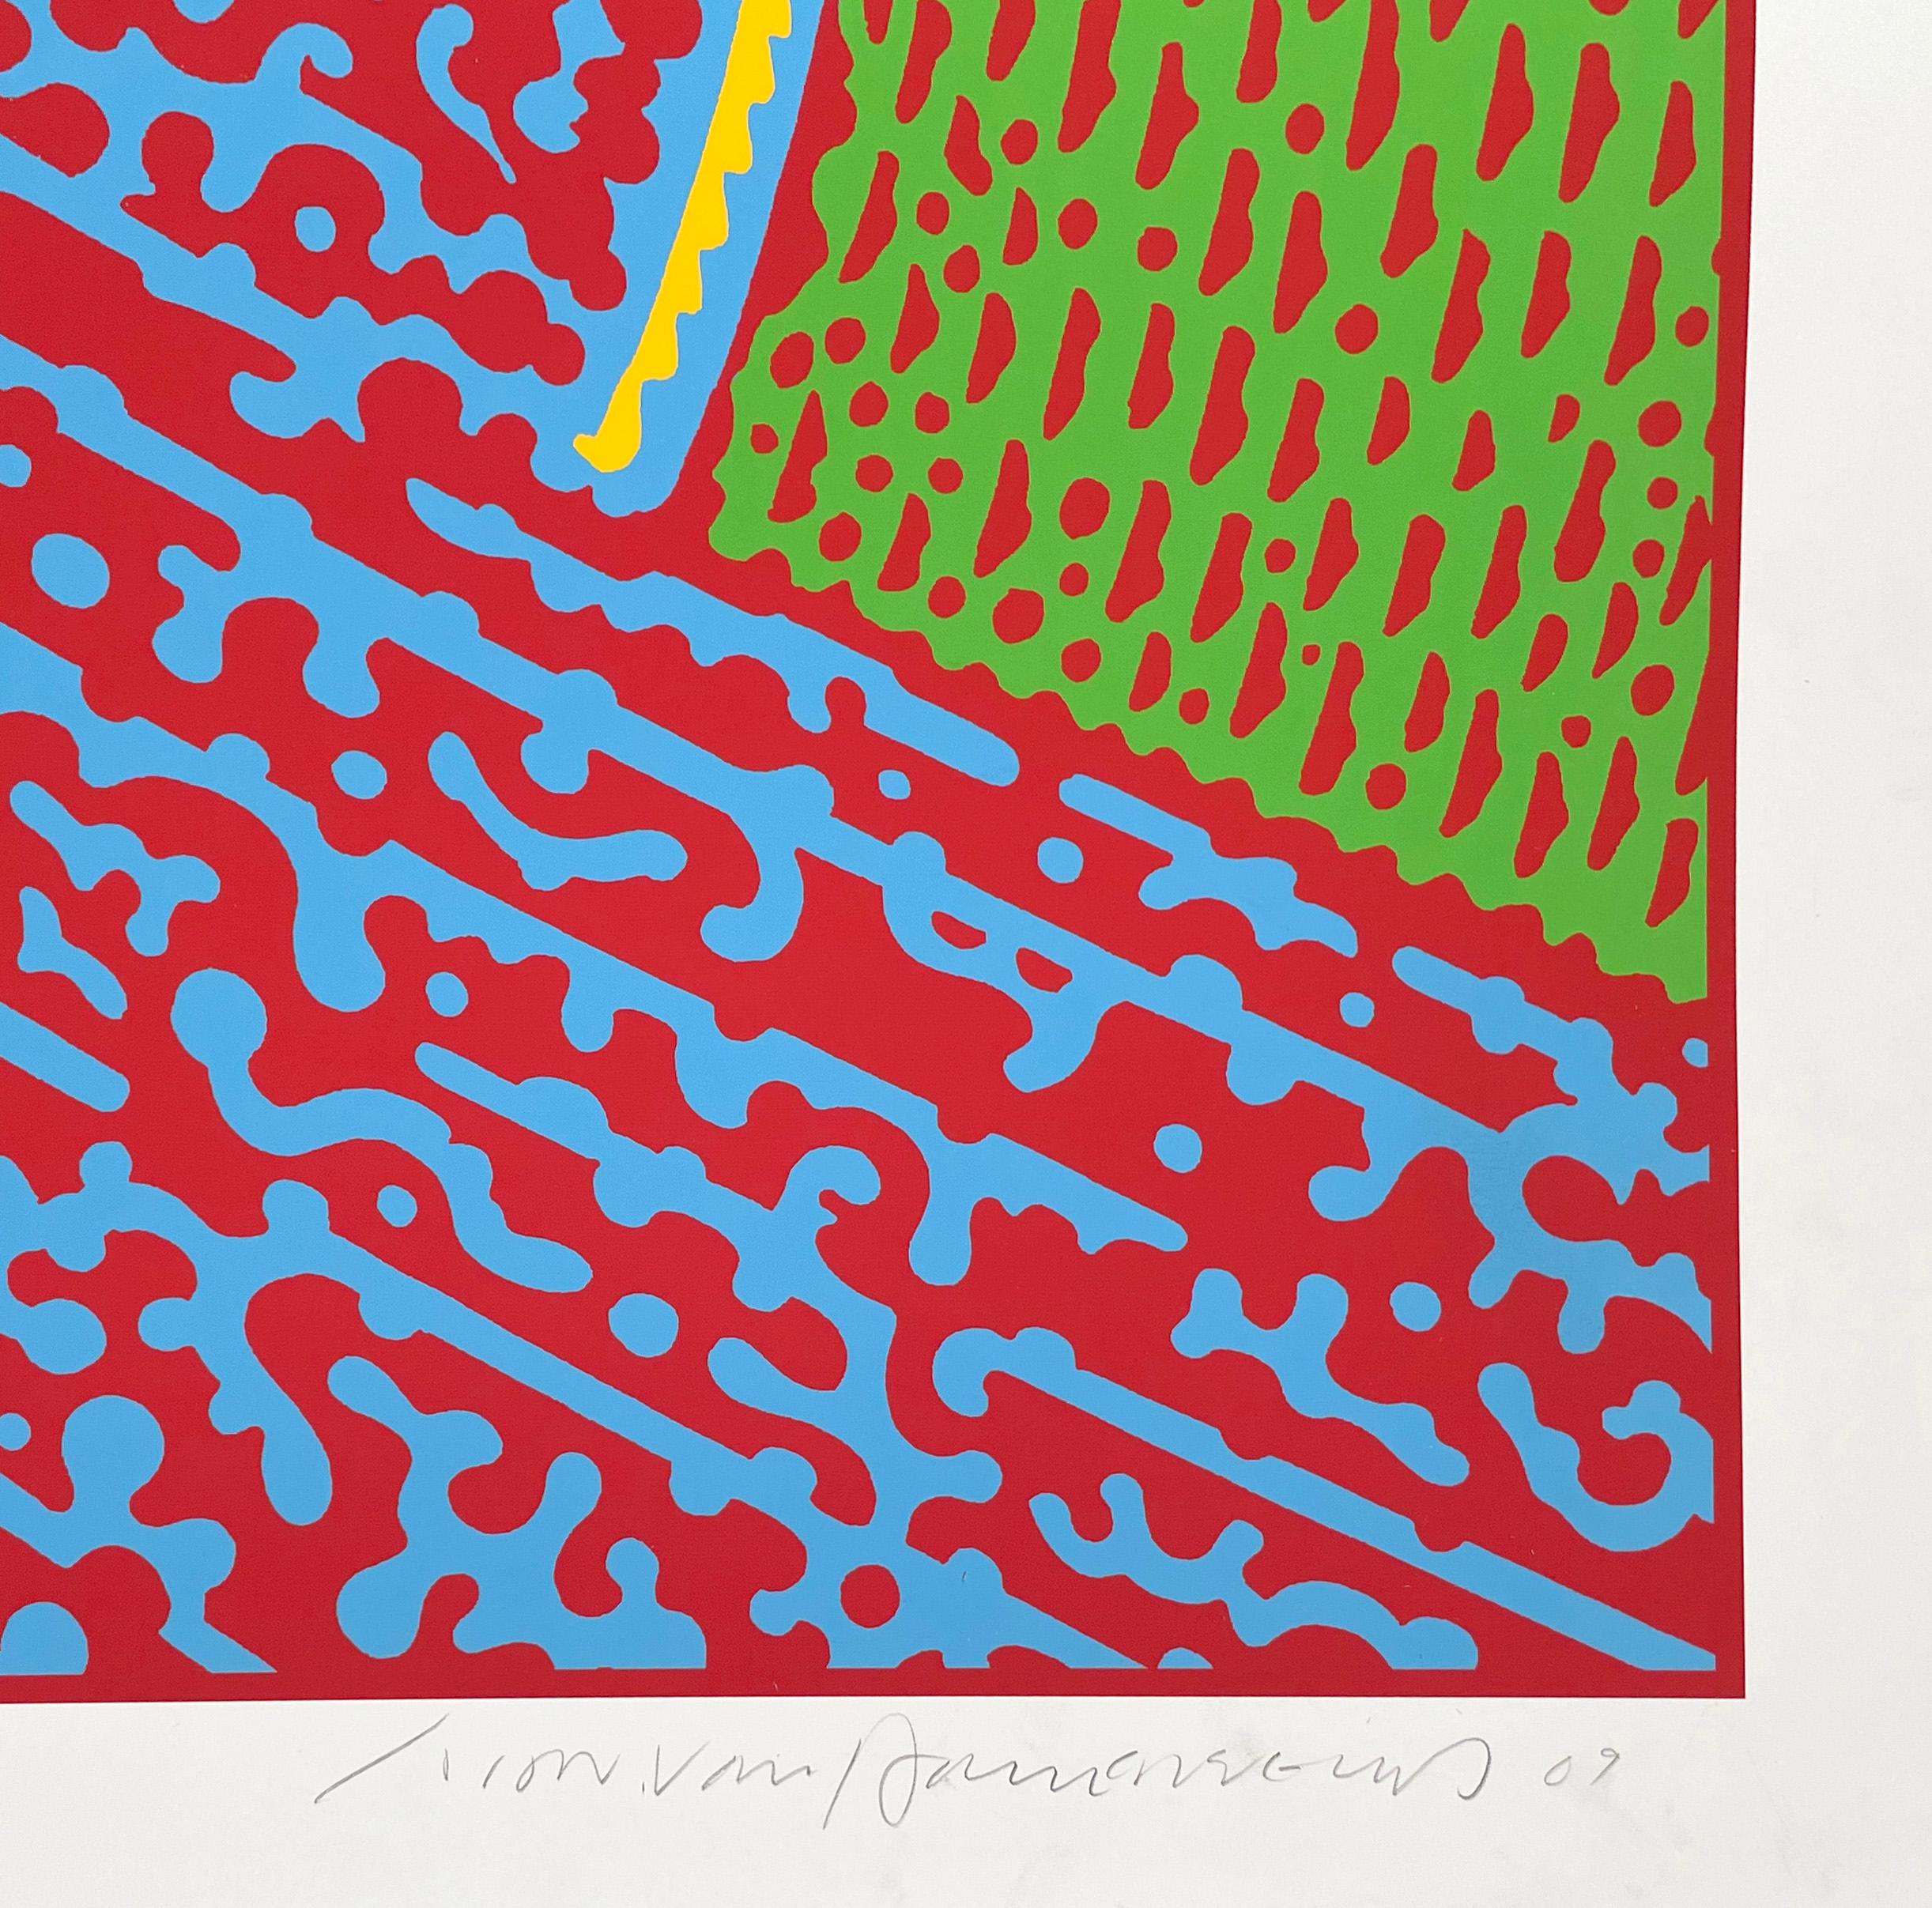 Title: “THE NEXT WAVE”
Artist: JOHN VAN HAMERSVELD
Medium: 4 color SERIGRAPH
Substrate: COVENTRY RAG 320 GSM
Edge: DECKLED
Paper Size: 34.25″ x 44”
Image Size: 30” x 40”
Signed and Numbered Edition: 134/150
Year: 2009

John Van Hamersveld (born